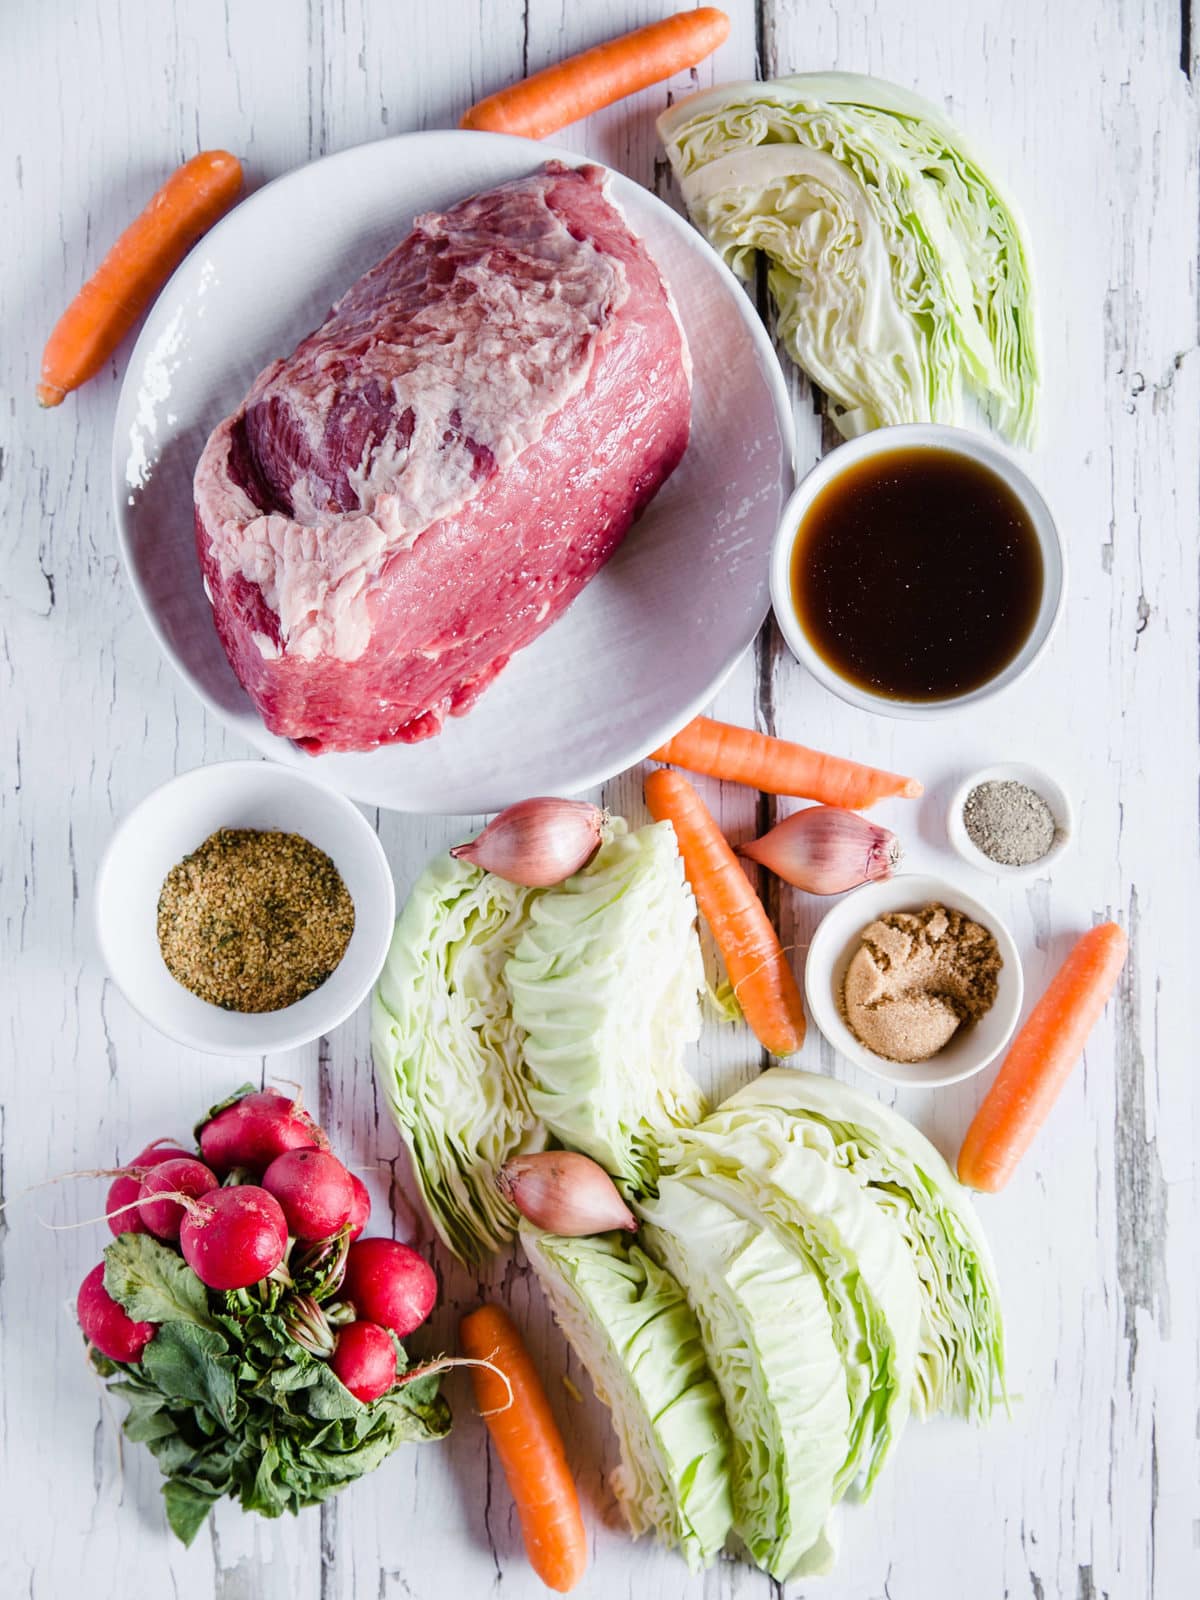 An overhead shot of all of the ingredients to make corned beef and cabbage: beef brisket with the excess fat removed, beef broth, corned beef seasonings, brown sugar erythritol, radishes, green cabbage, shallots, and carrots.